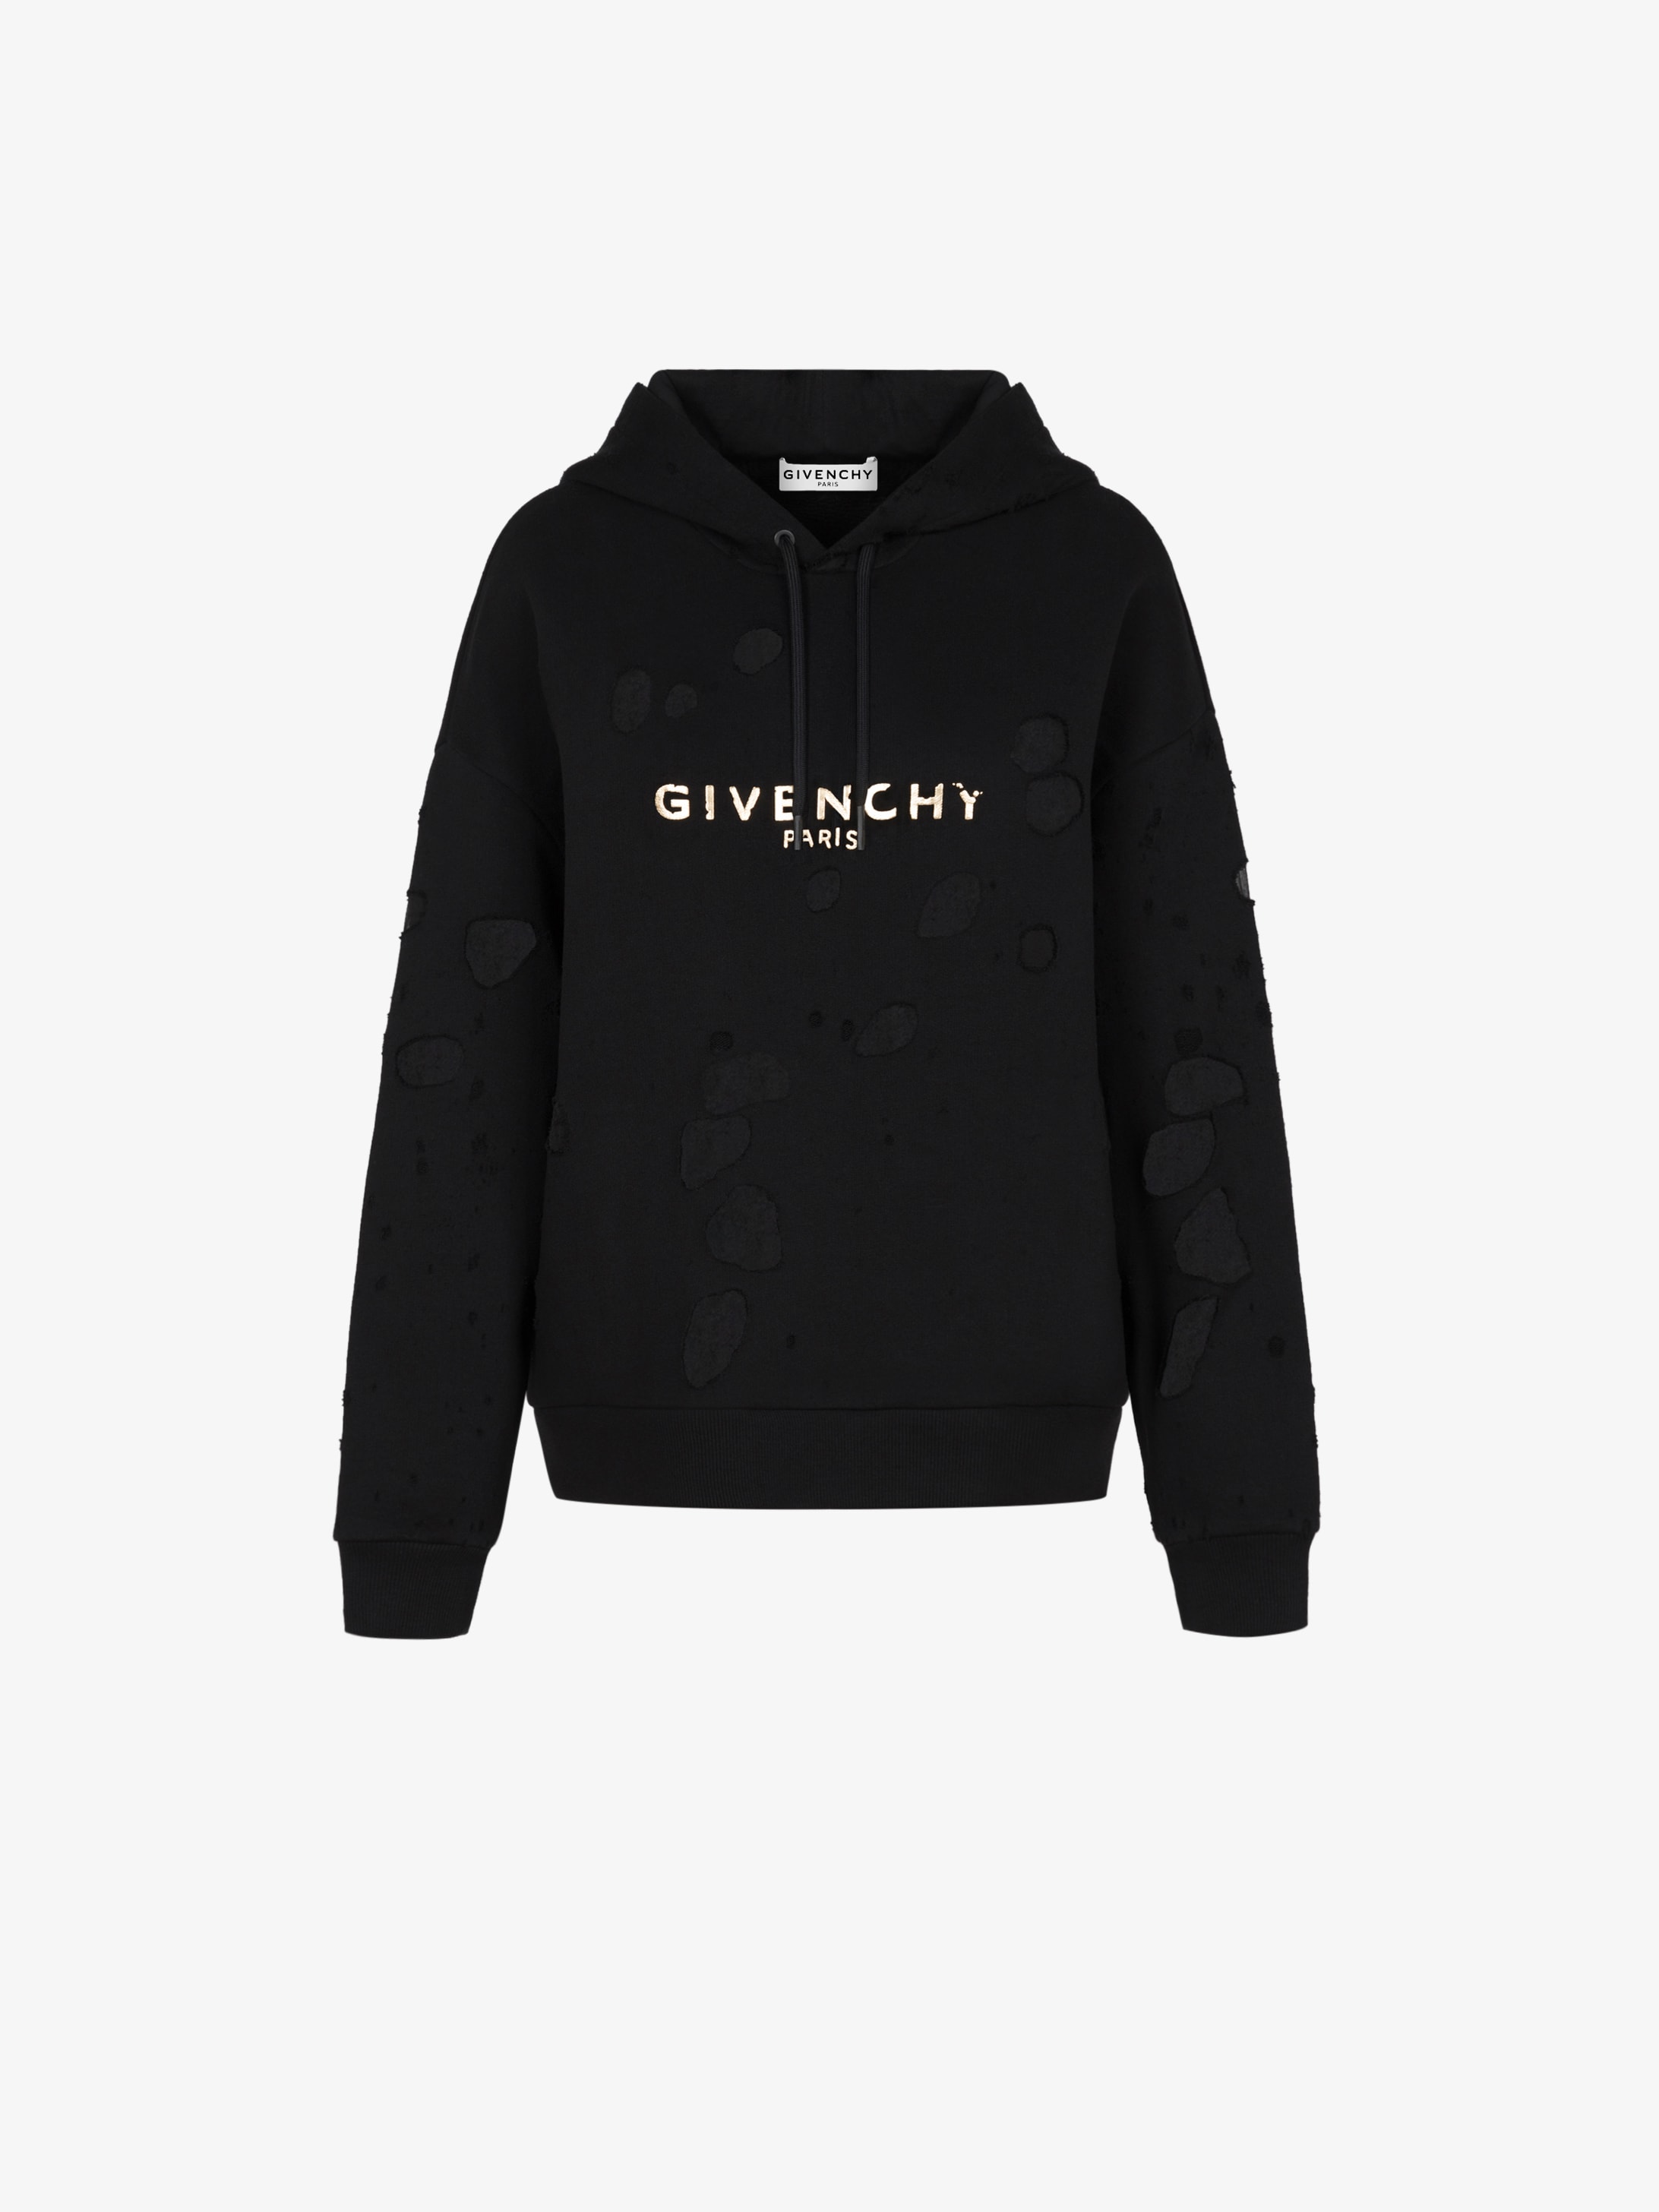 Vintage GIVENCHY PARIS oversized hoodie 